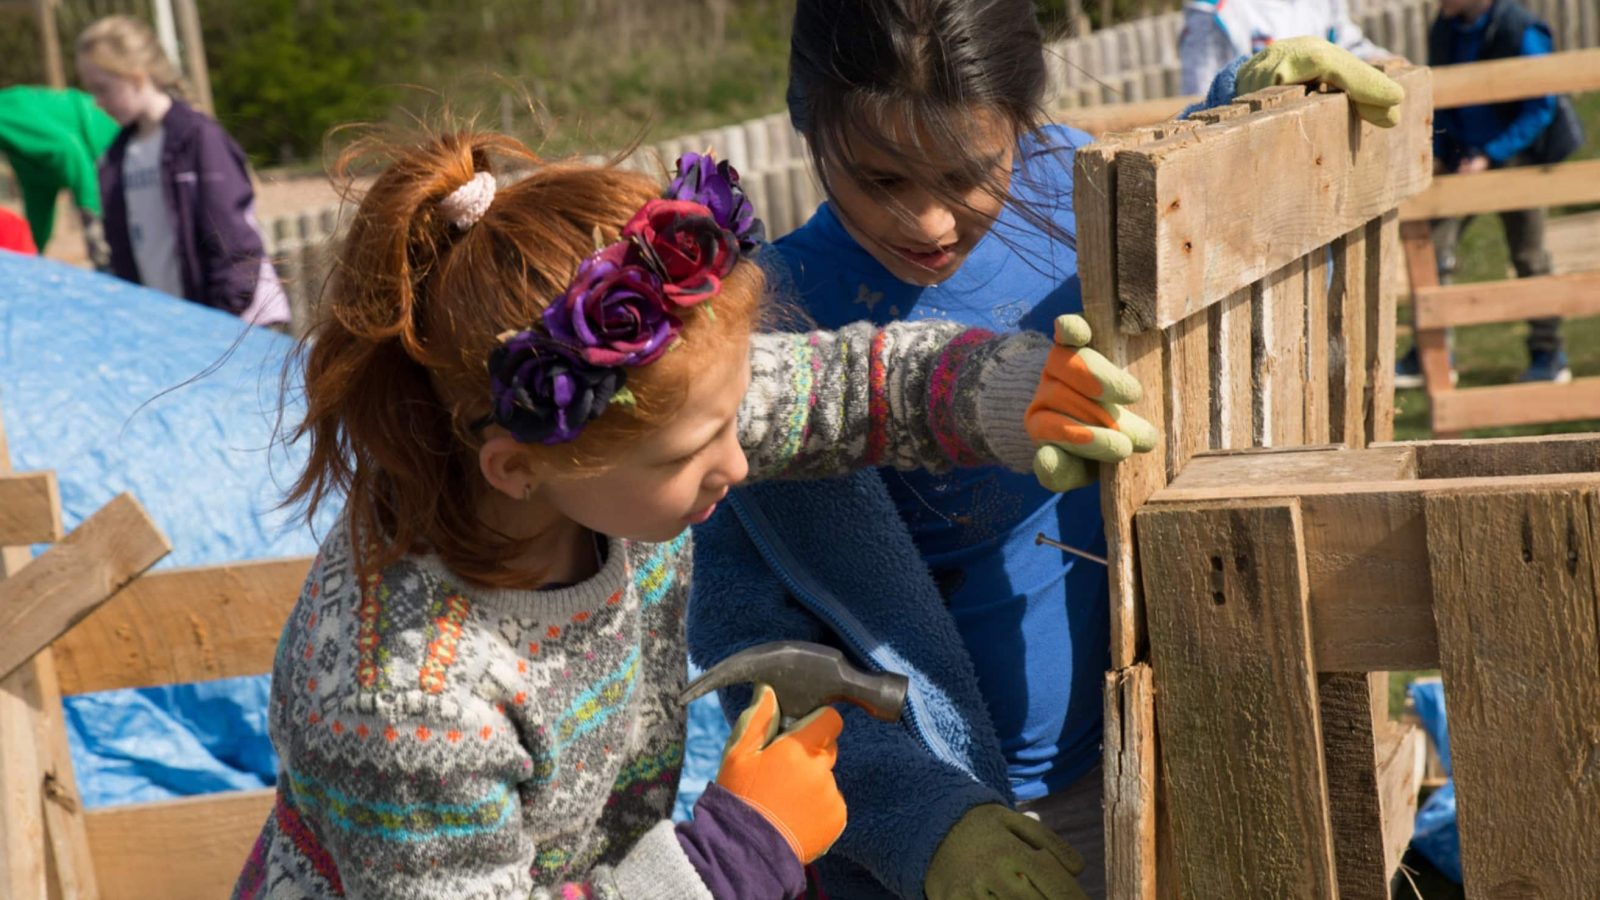 Two young girls, one with a floral headband, engage in building a website design with wooden materials outdoors, using tools and wearing work gloves, with other children in the background.